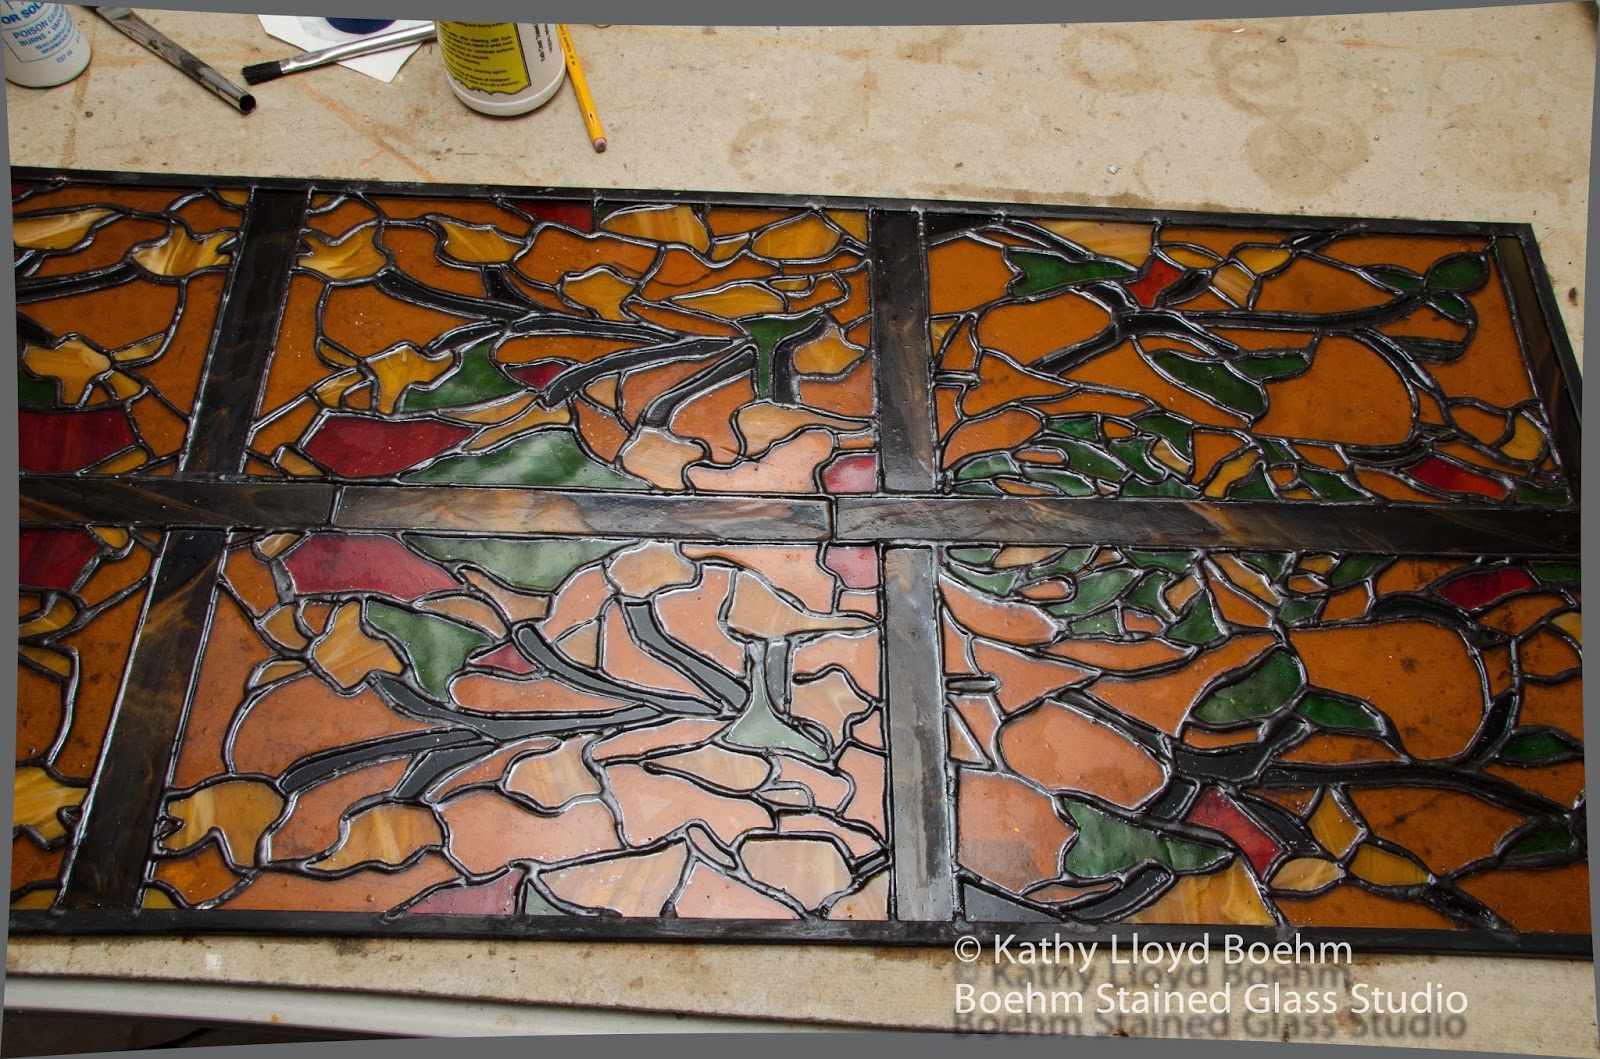 Boehm Stained Glass Blog: Rug Design in Stained Glass - Soldered and Framed